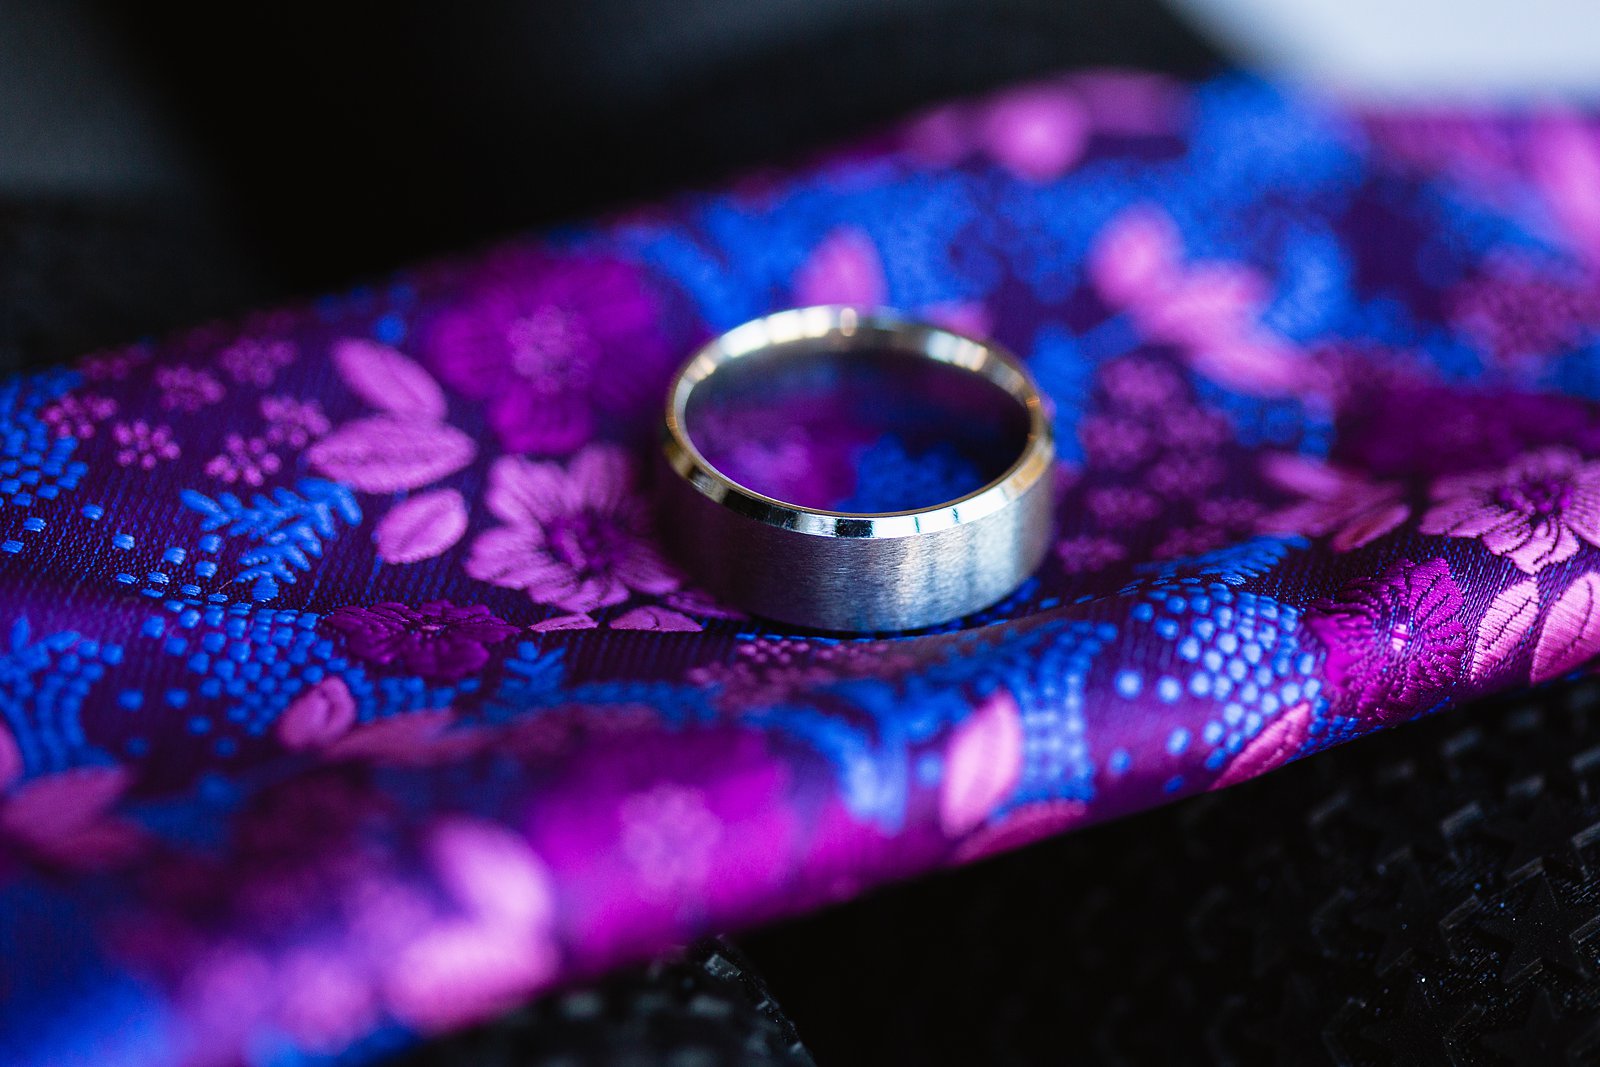 Simple silver wedding band on purple floral pocket square by PMA Photography.